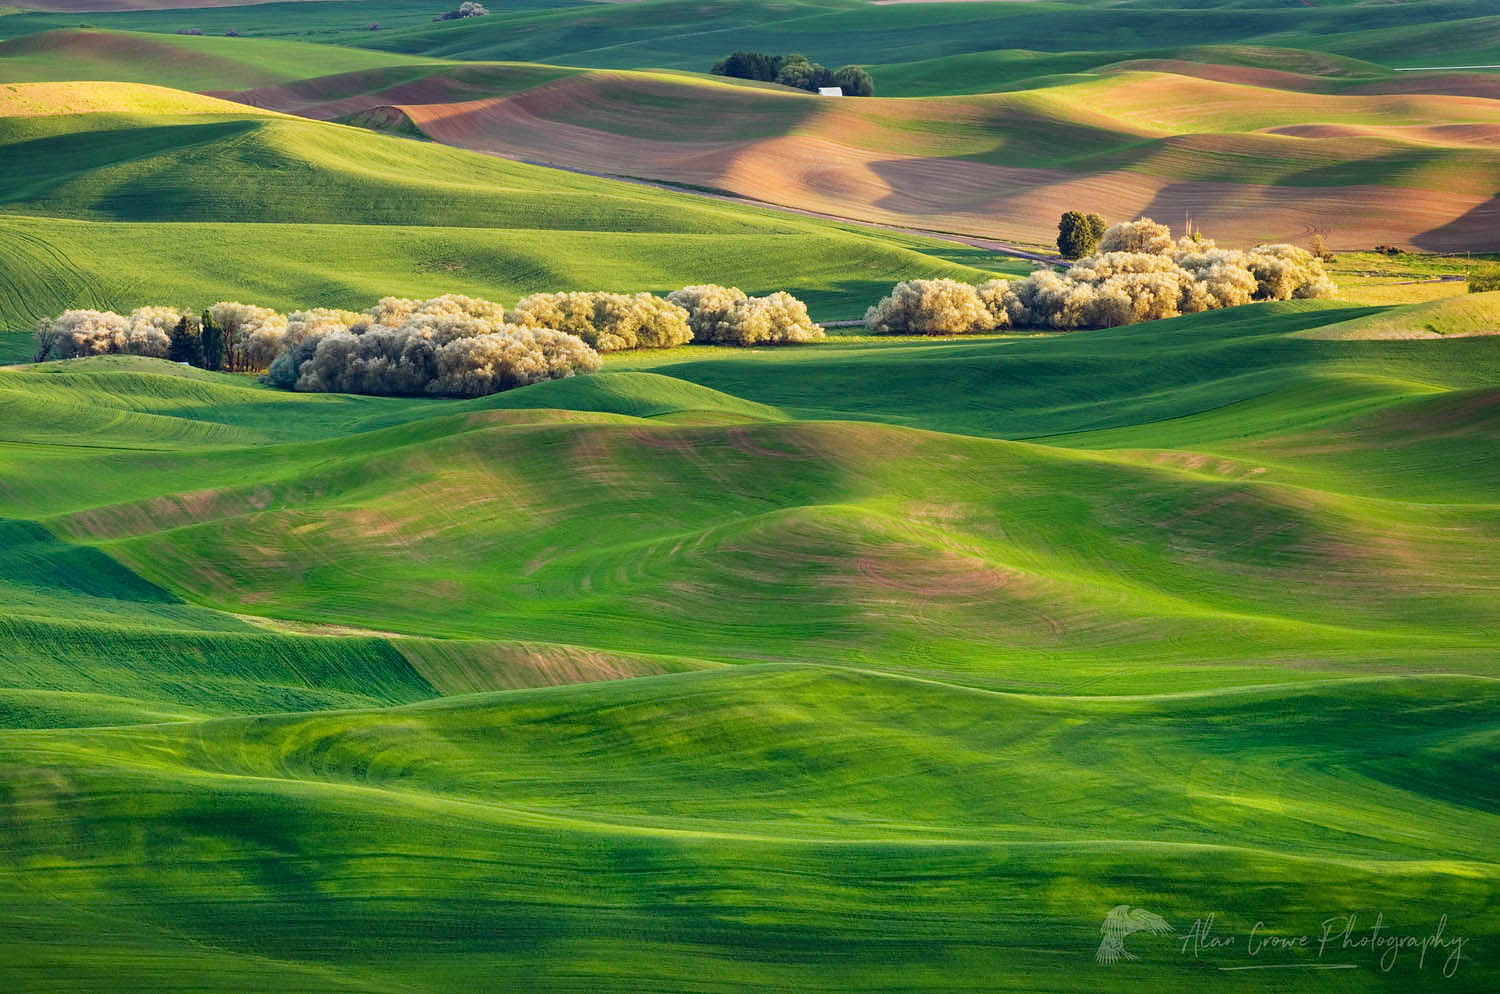 Rolling hills of green wheat fields seen from Steptoe Butte, the Palouse region of the Inland Empire of Washington #51646